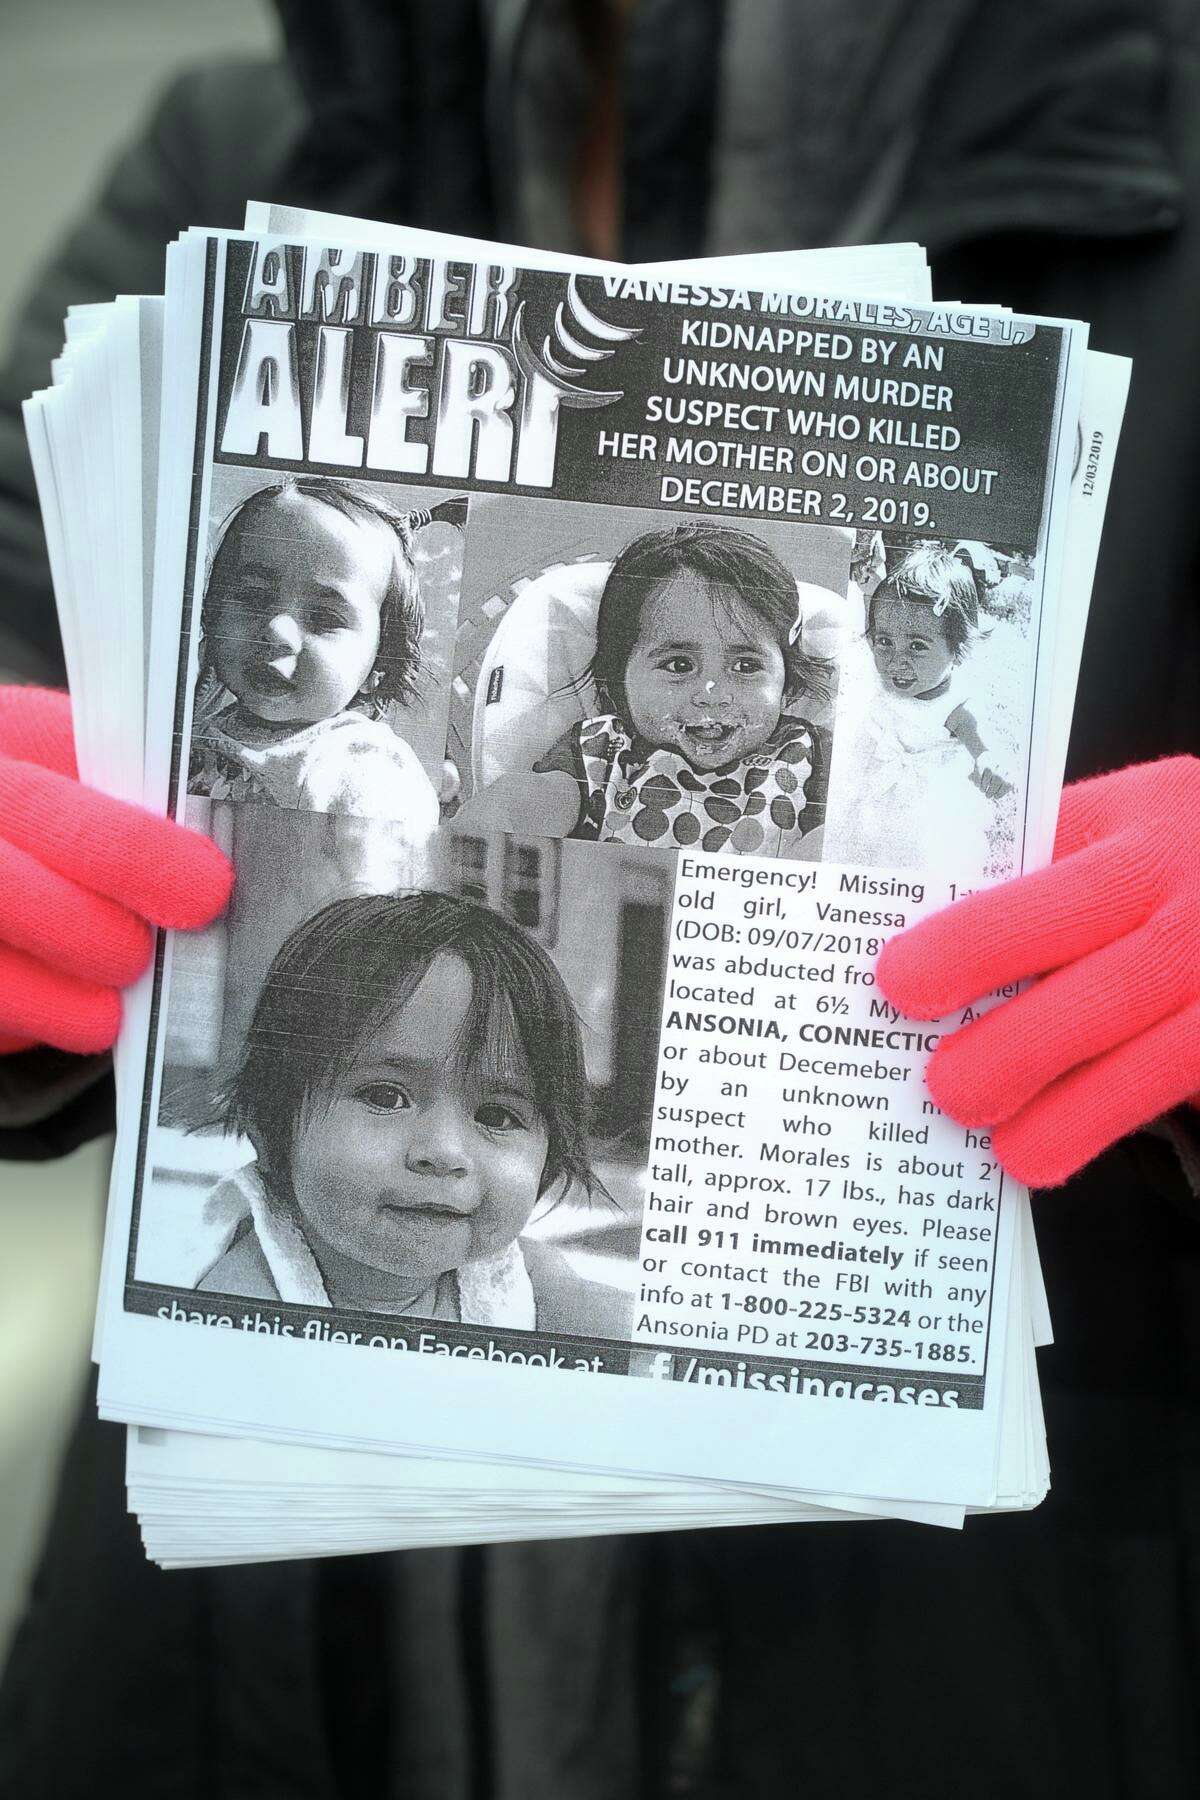 Residents concerned with finding Vanessa Morales, the Ansonia toddler who went missing after the murder of her mother, still continue to hand out flyers to bring attention to the case.